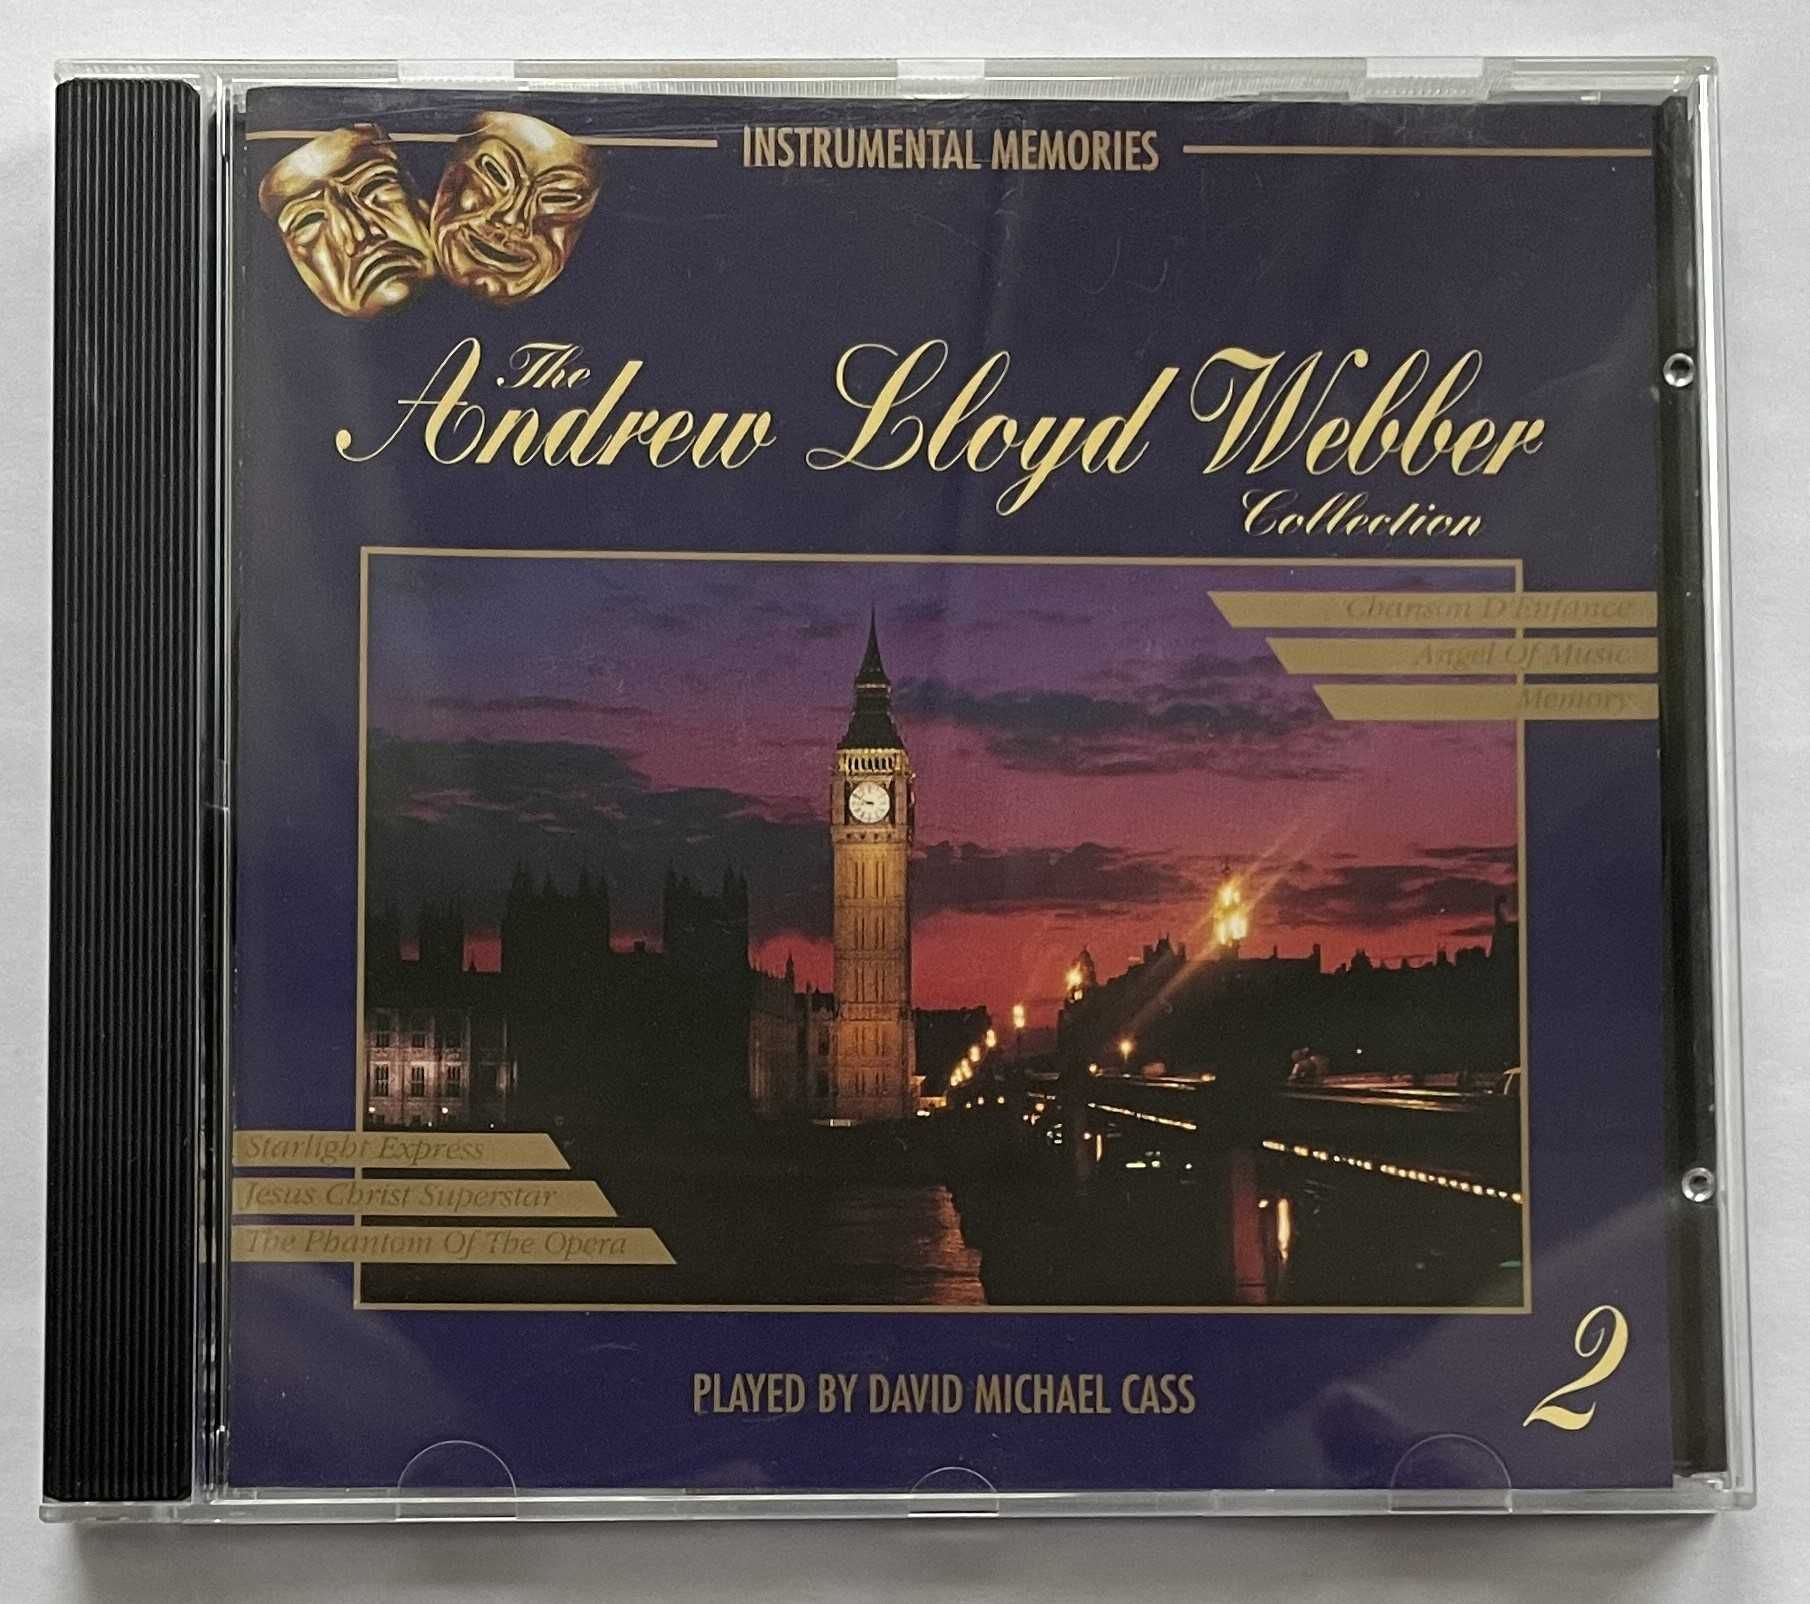 (Płyta CD) "Andrew LLoyd Weber Collection" by David Michaeal Cass